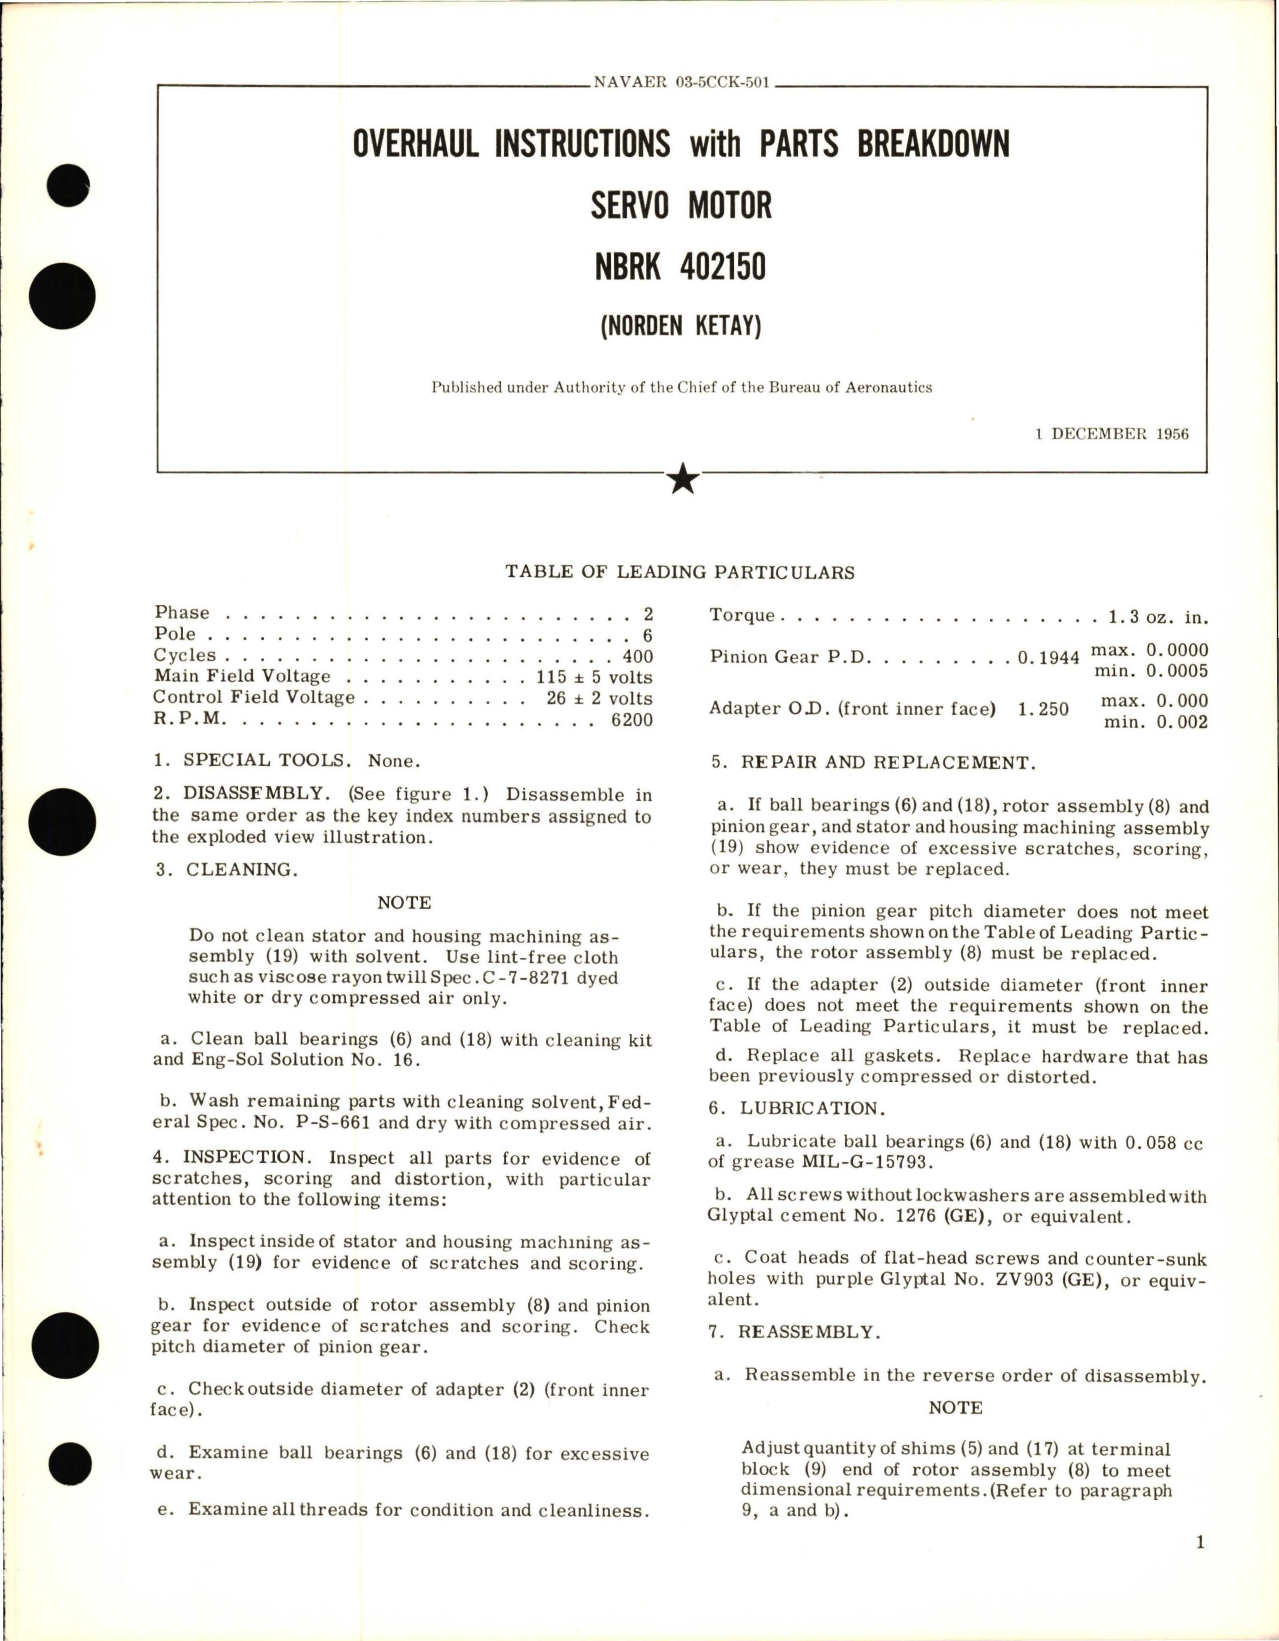 Sample page 1 from AirCorps Library document: Overhaul Instructions with Parts Breakdown for Servo Motor - NBRK 402150